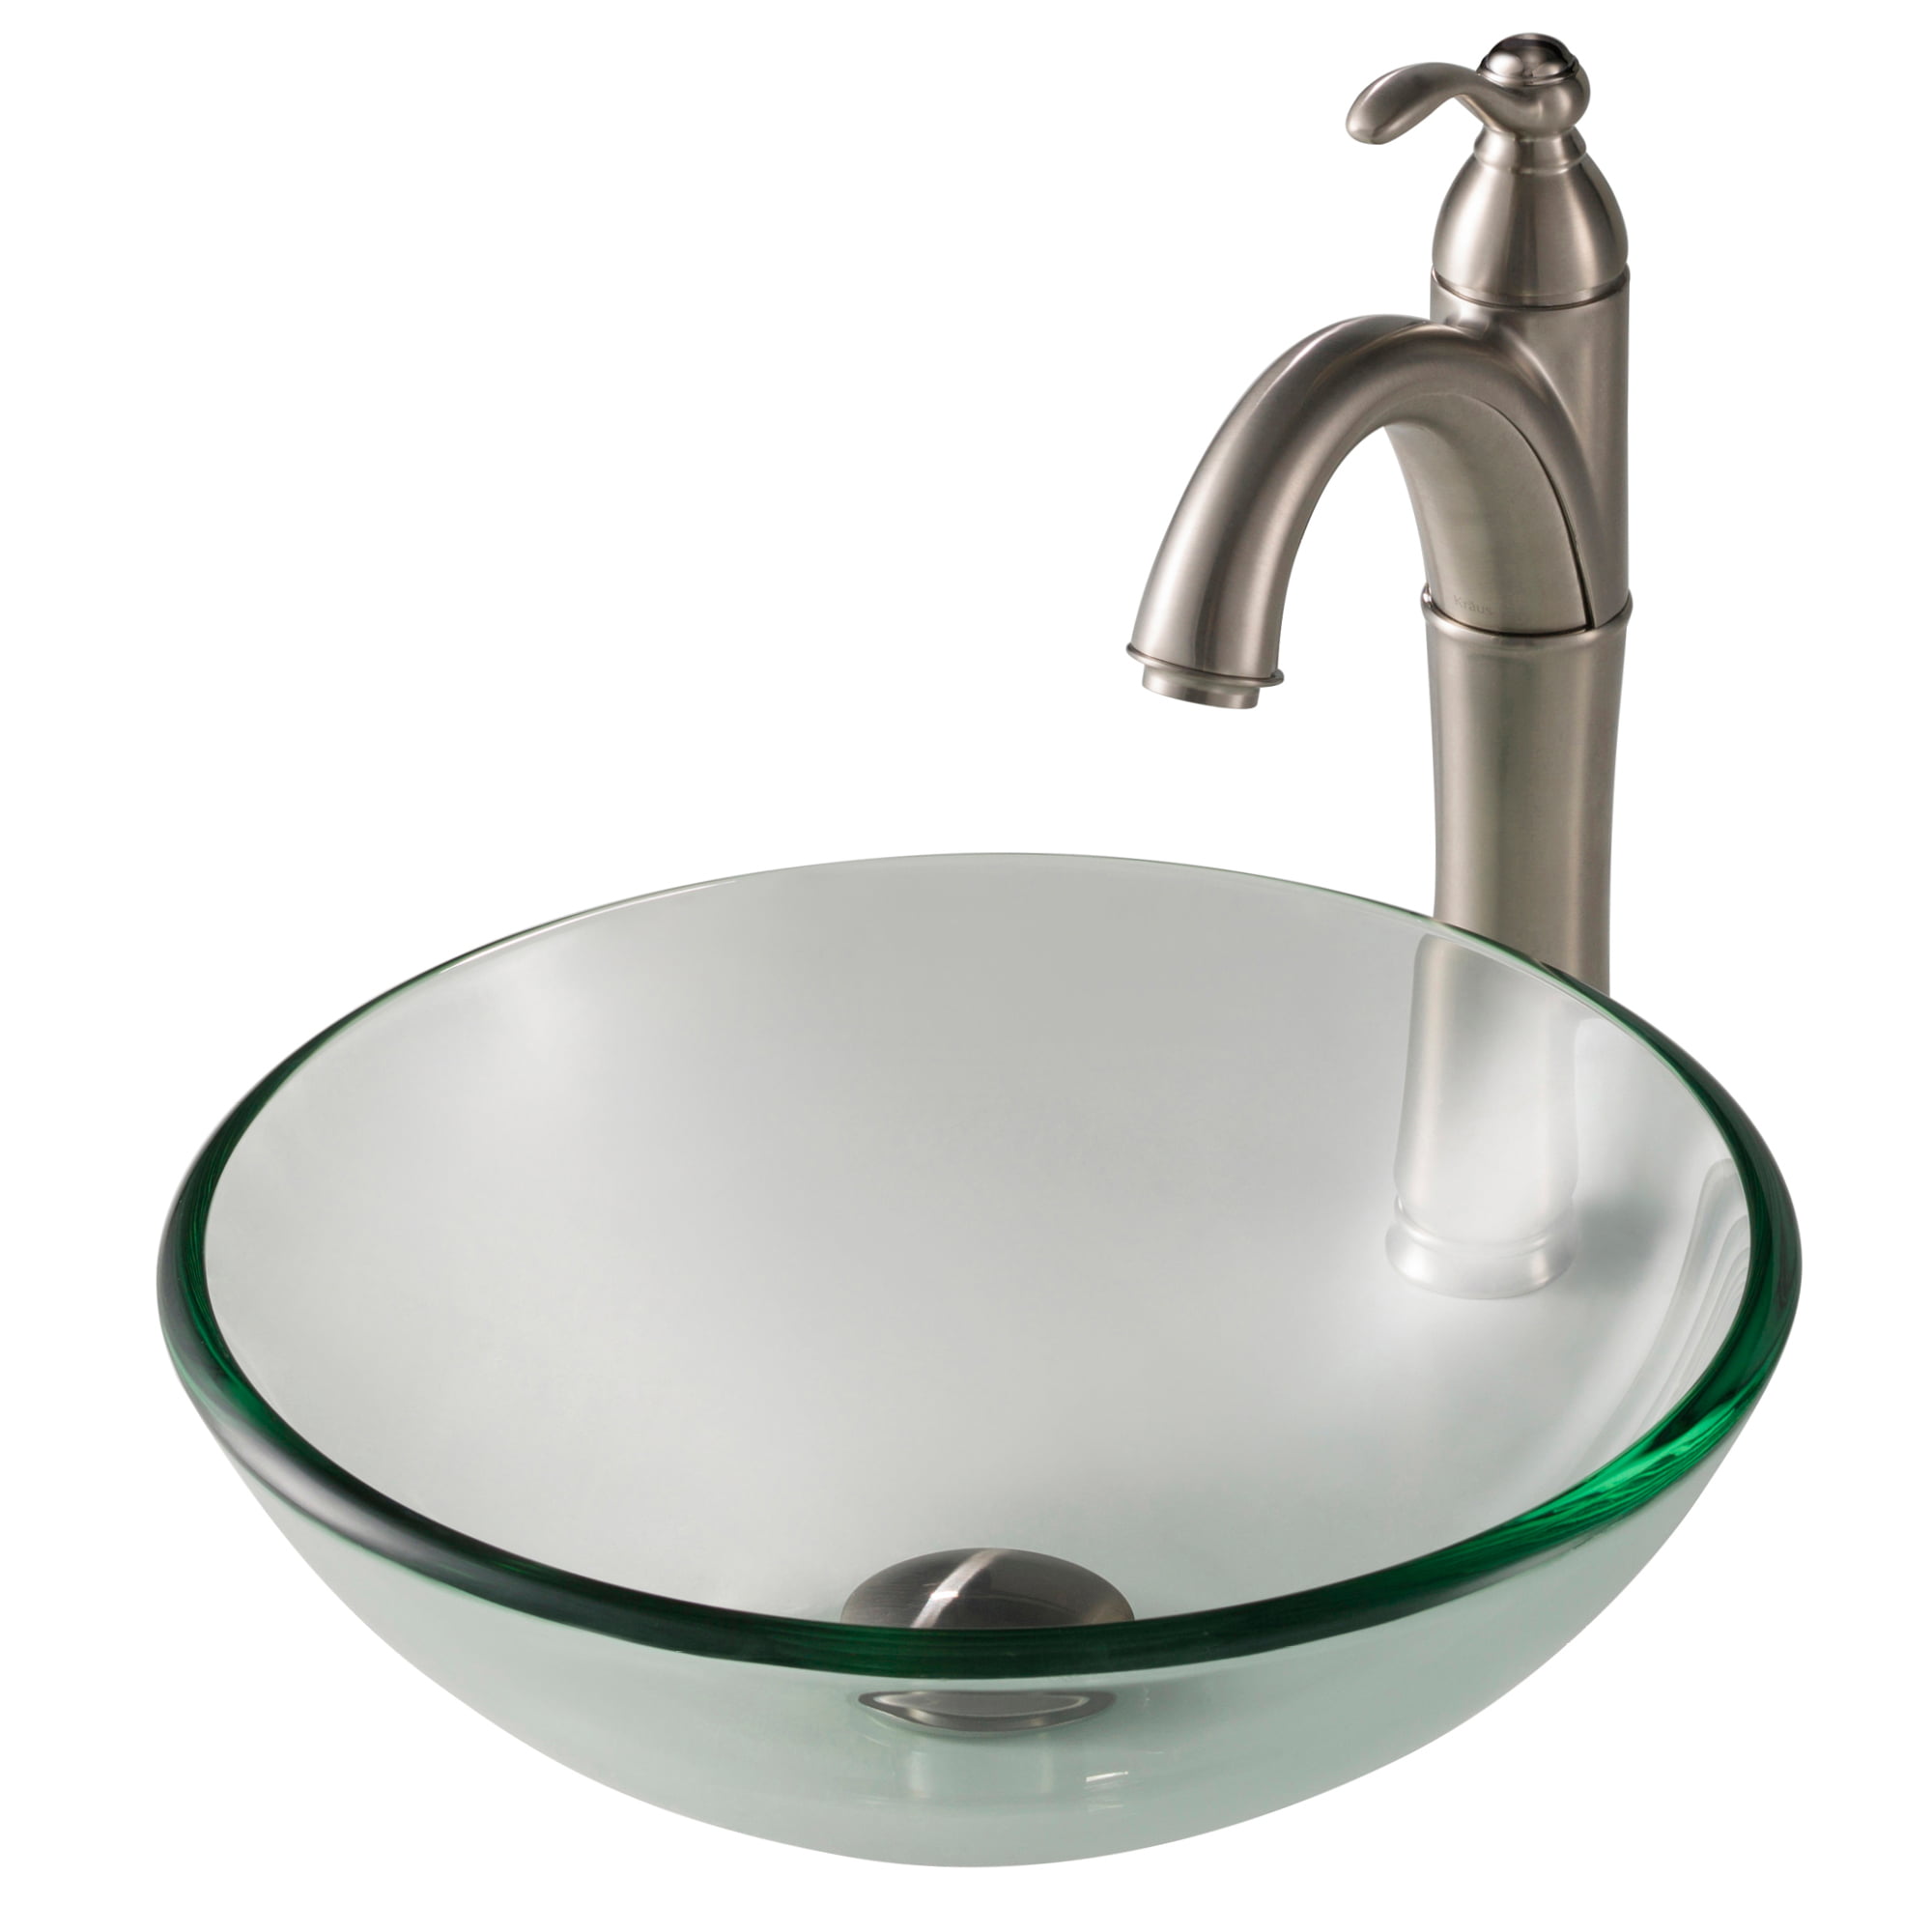 Kraus 14 Inch Clear Glass Bathroom Vessel Sink And Riviera Faucet Combo Set With Pop Up Drain